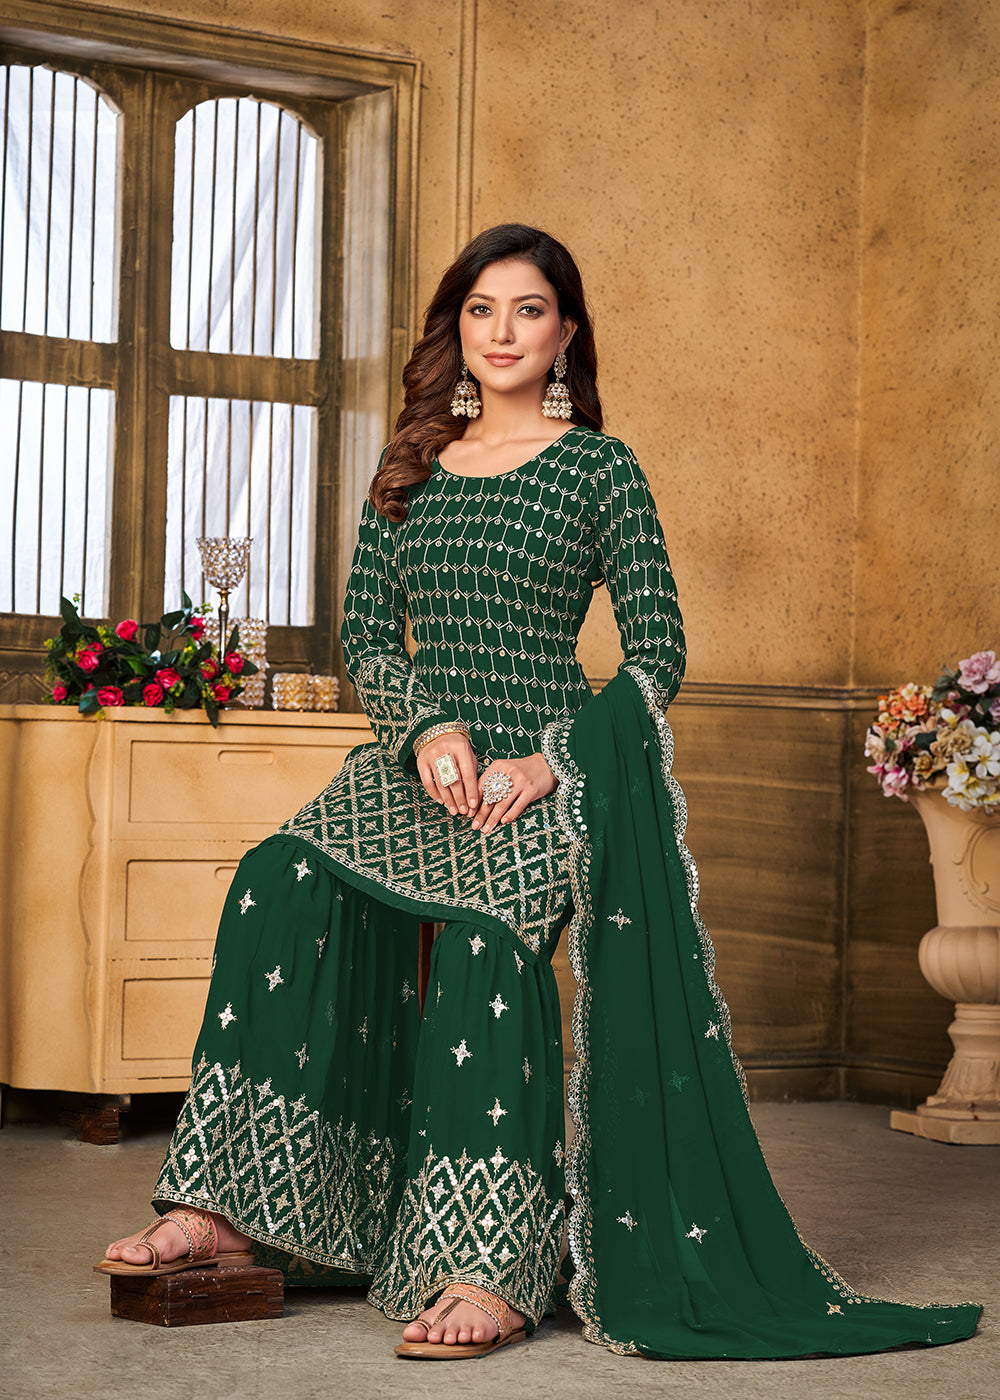 Shop Now Pretty Sequins Embroidered Green Festive Gharara Style Suit Online at Empress Clothing in USA, UK, Canada, Italy & Worldwide.